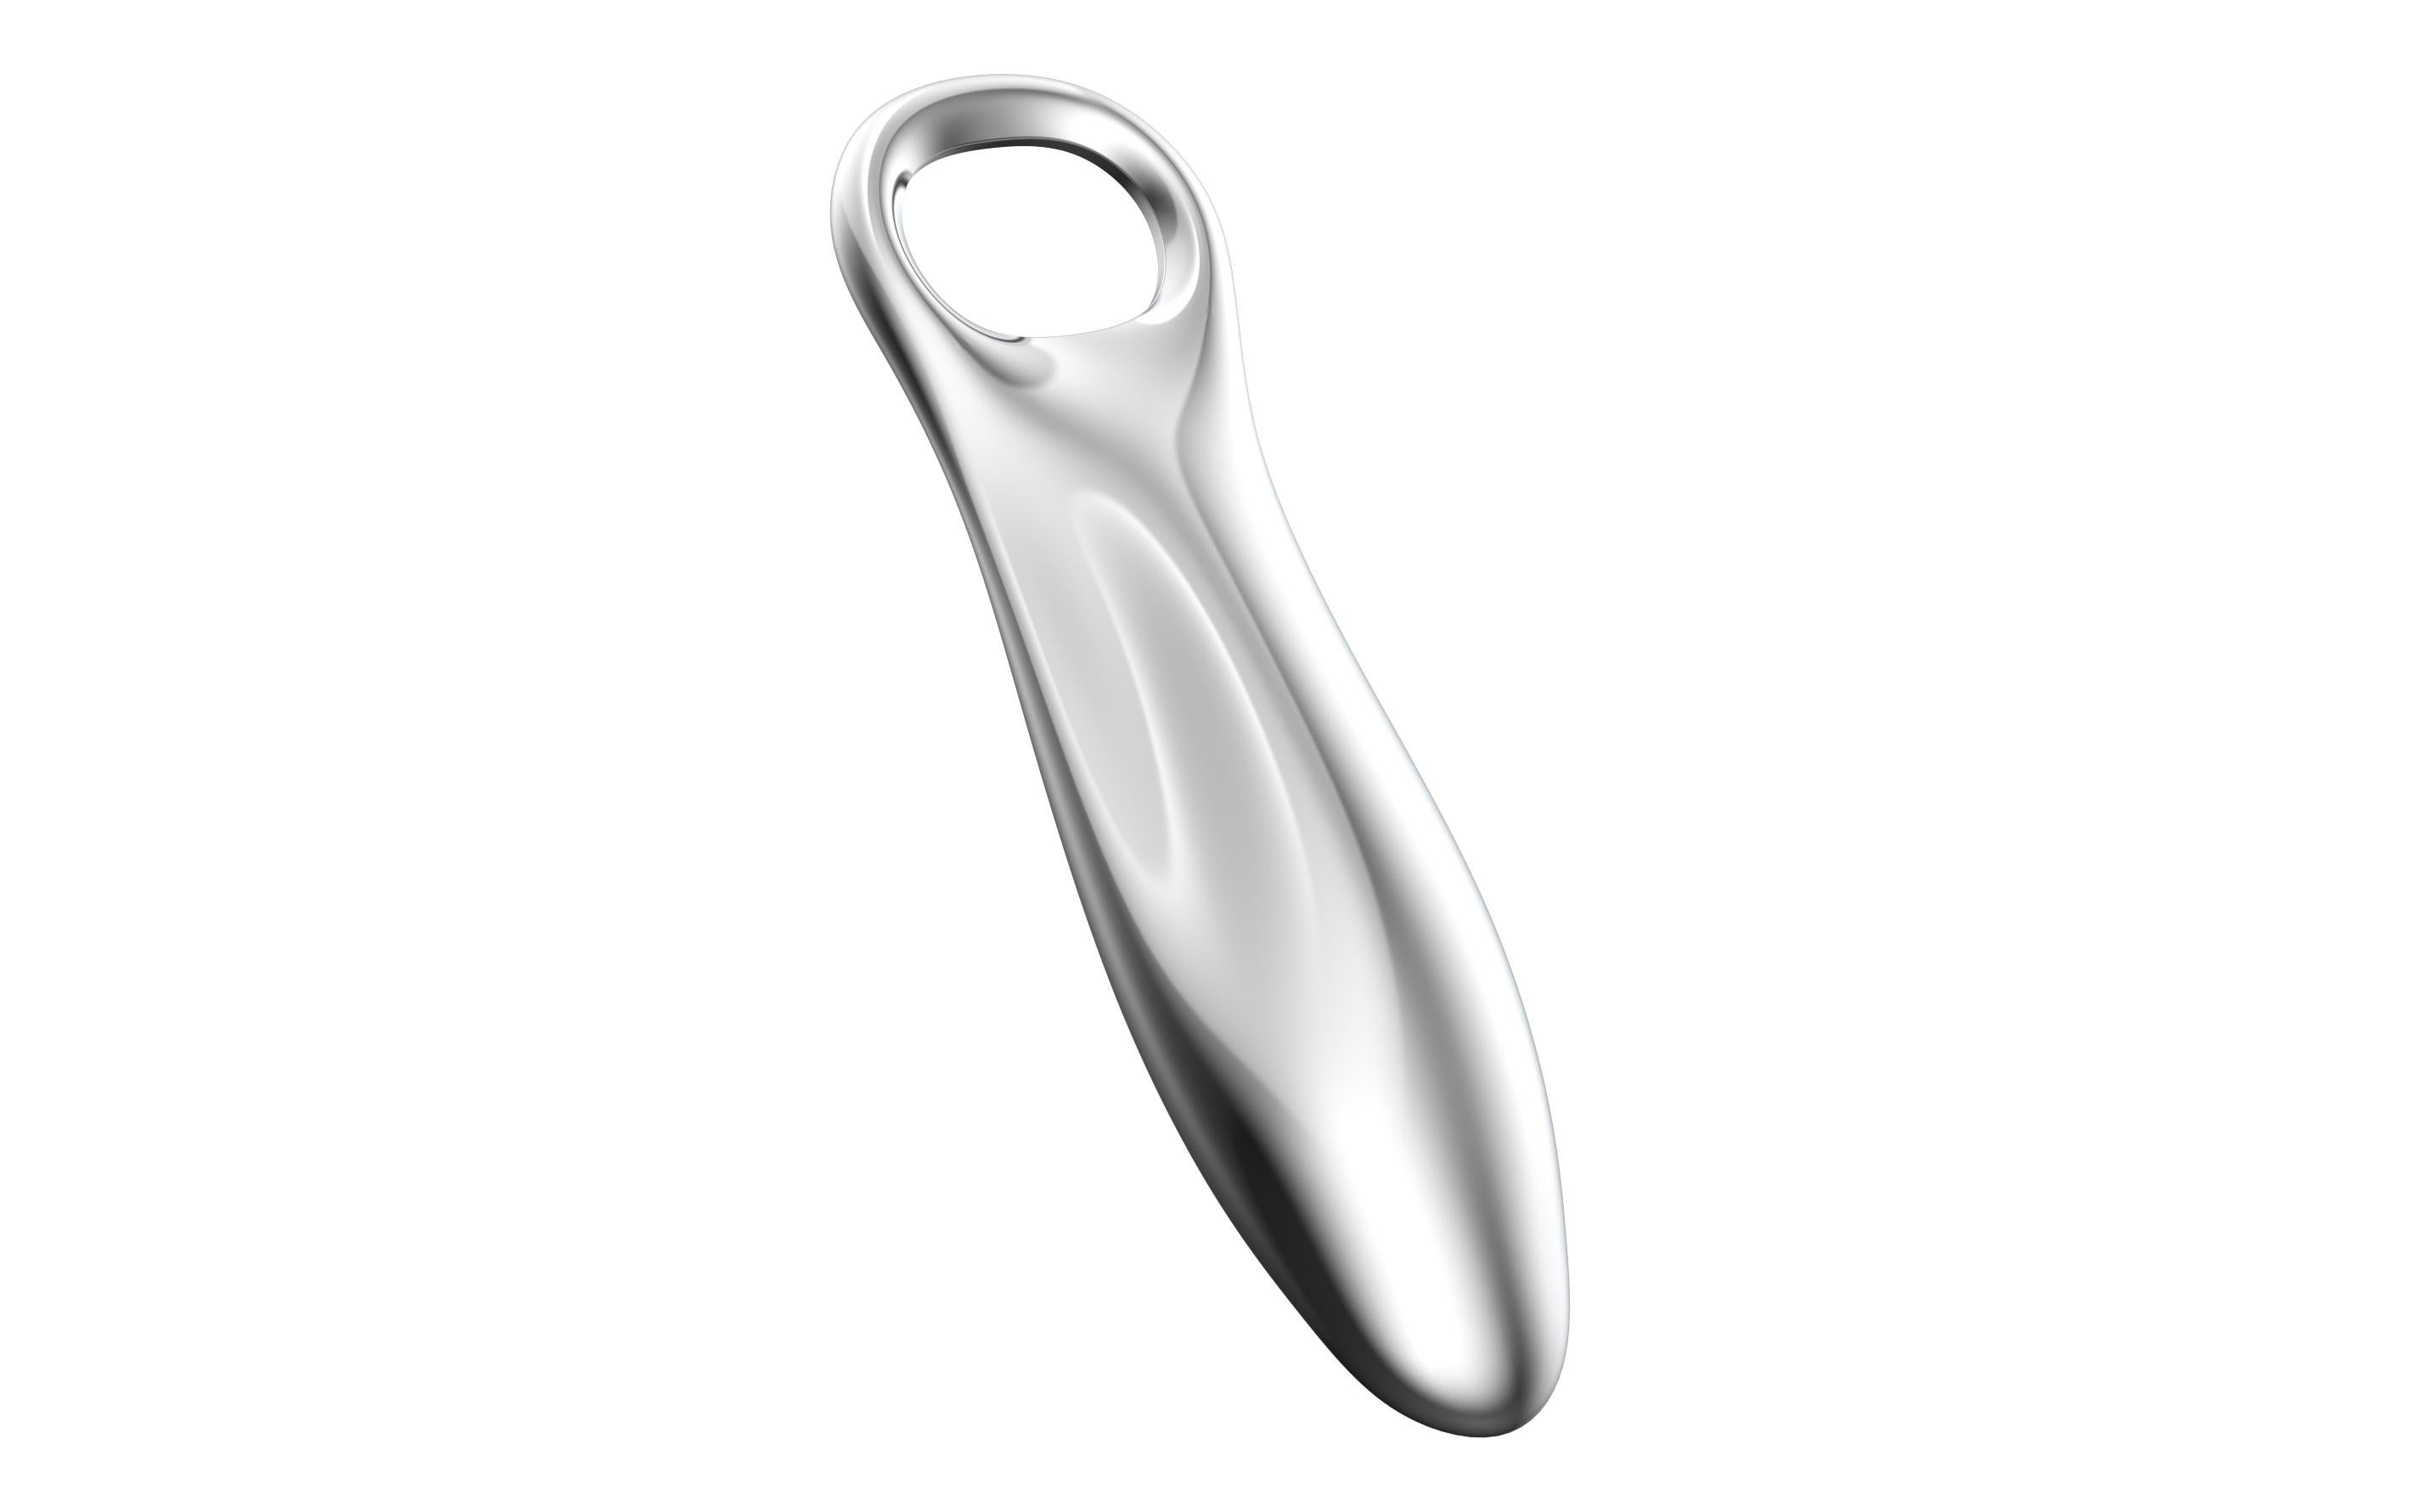 Innovative, premium, and sophisticated, the Oflow Bottle Opener by Mattice Boets elevates functional design to an art form. Skillfully crafted to embody the philosophy of natural intelligence, this piece transcends mere utility to become an object